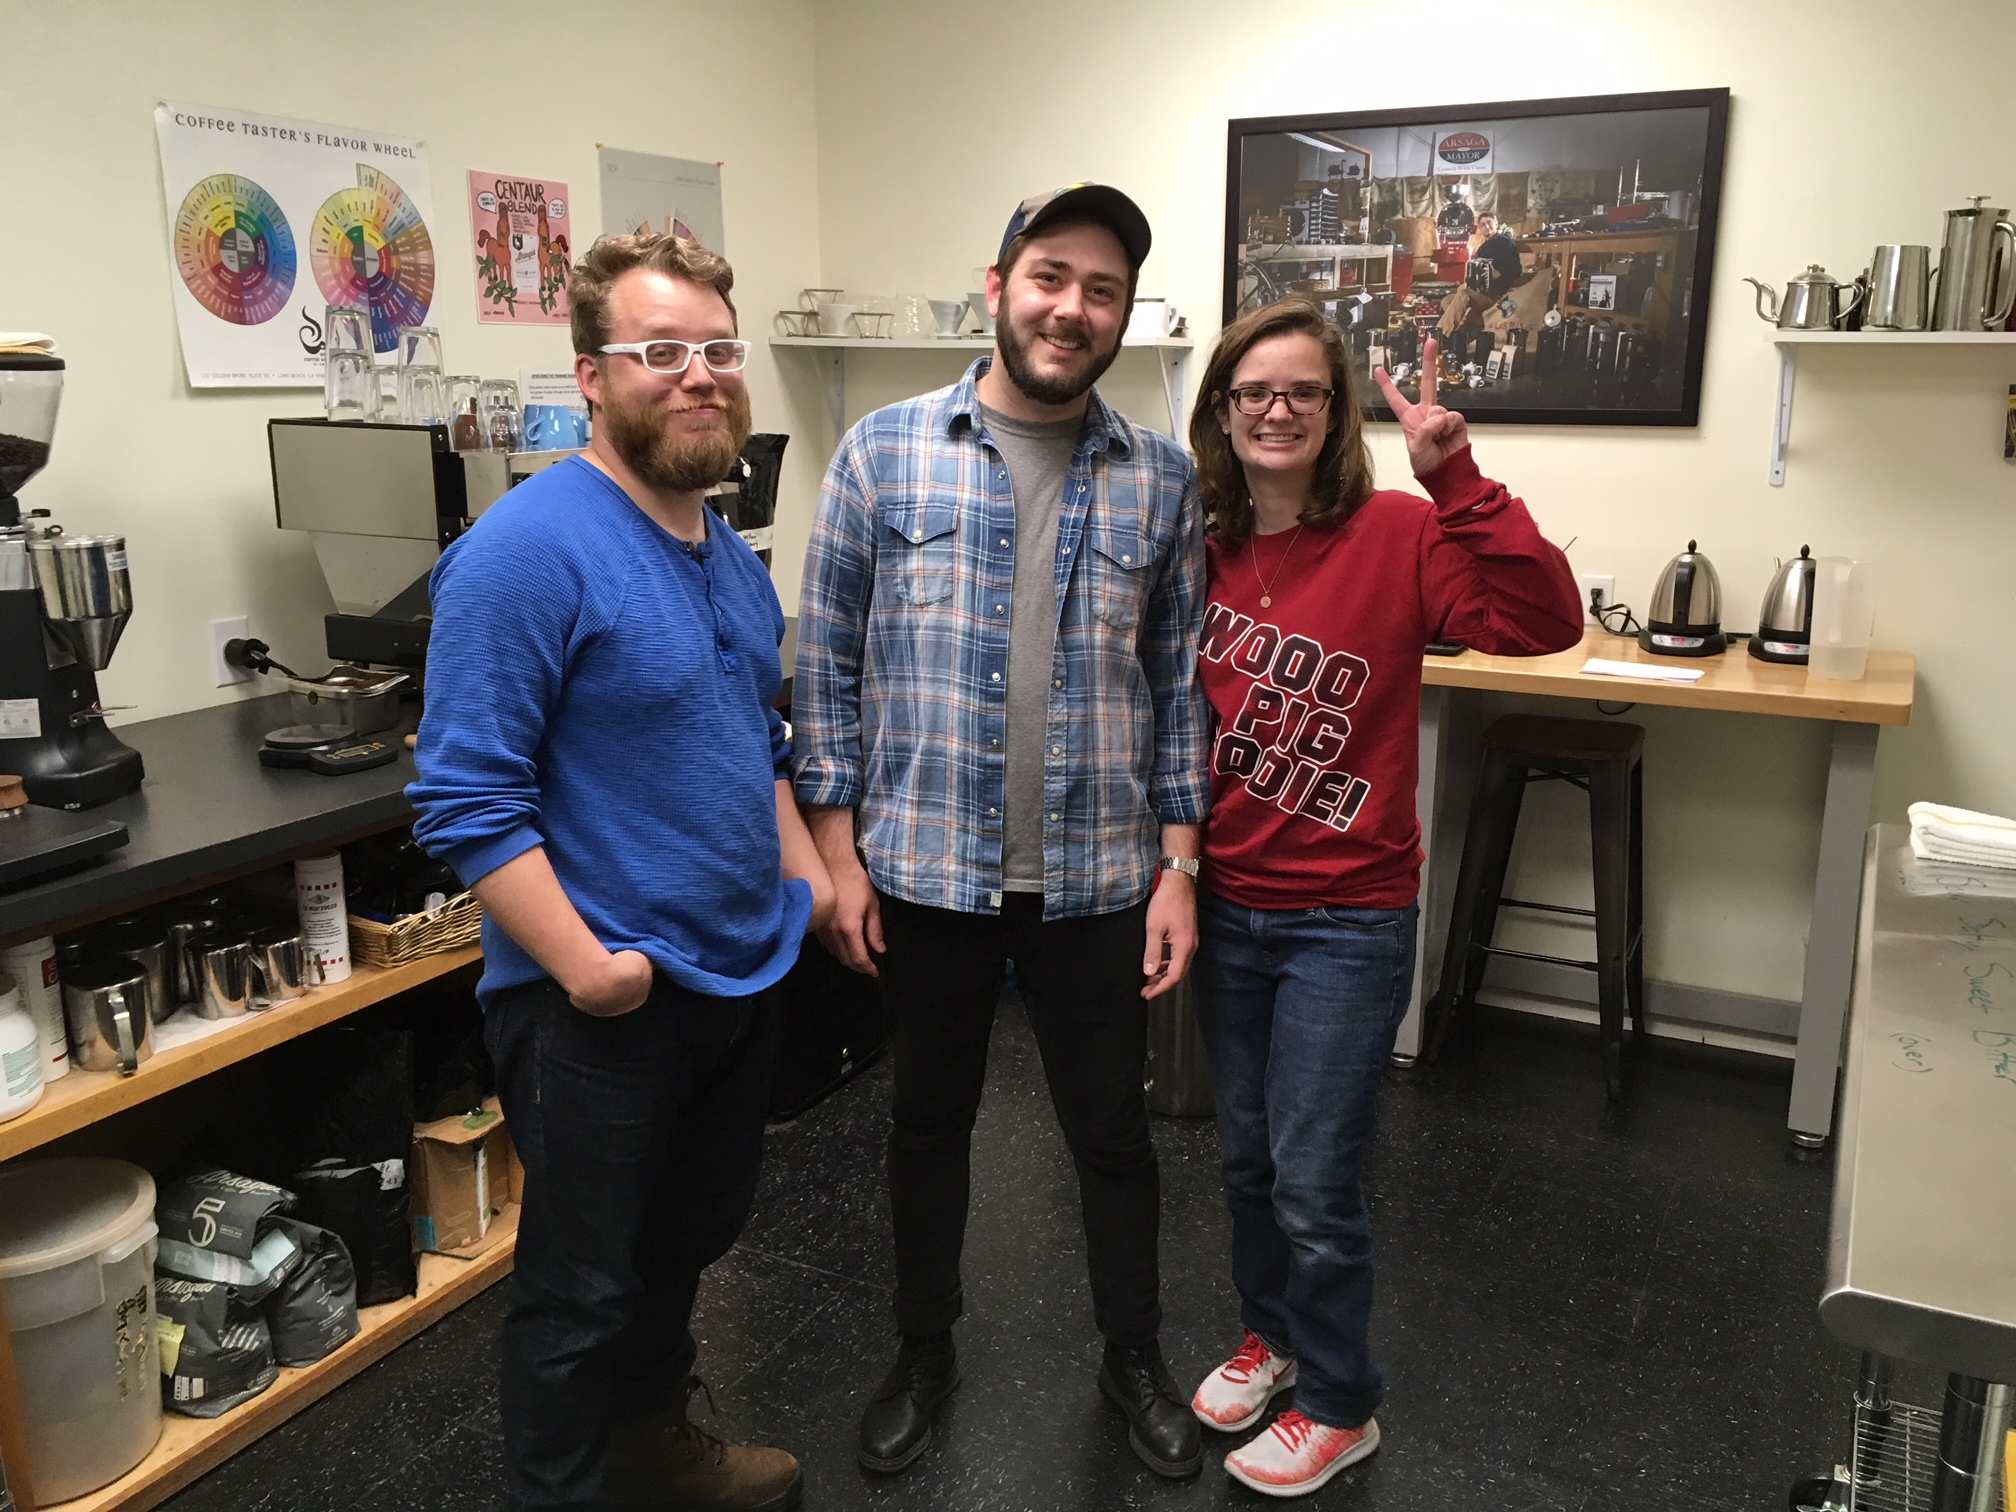   The Hum: Arsaga’s Coffee Roasters supplies The Hum and trains students at their off-site teaching kitchen and roastery.    The Hum  is a socially engaged artwork that integrates and adapts the coffee house model for co-learning, co-creating, and co